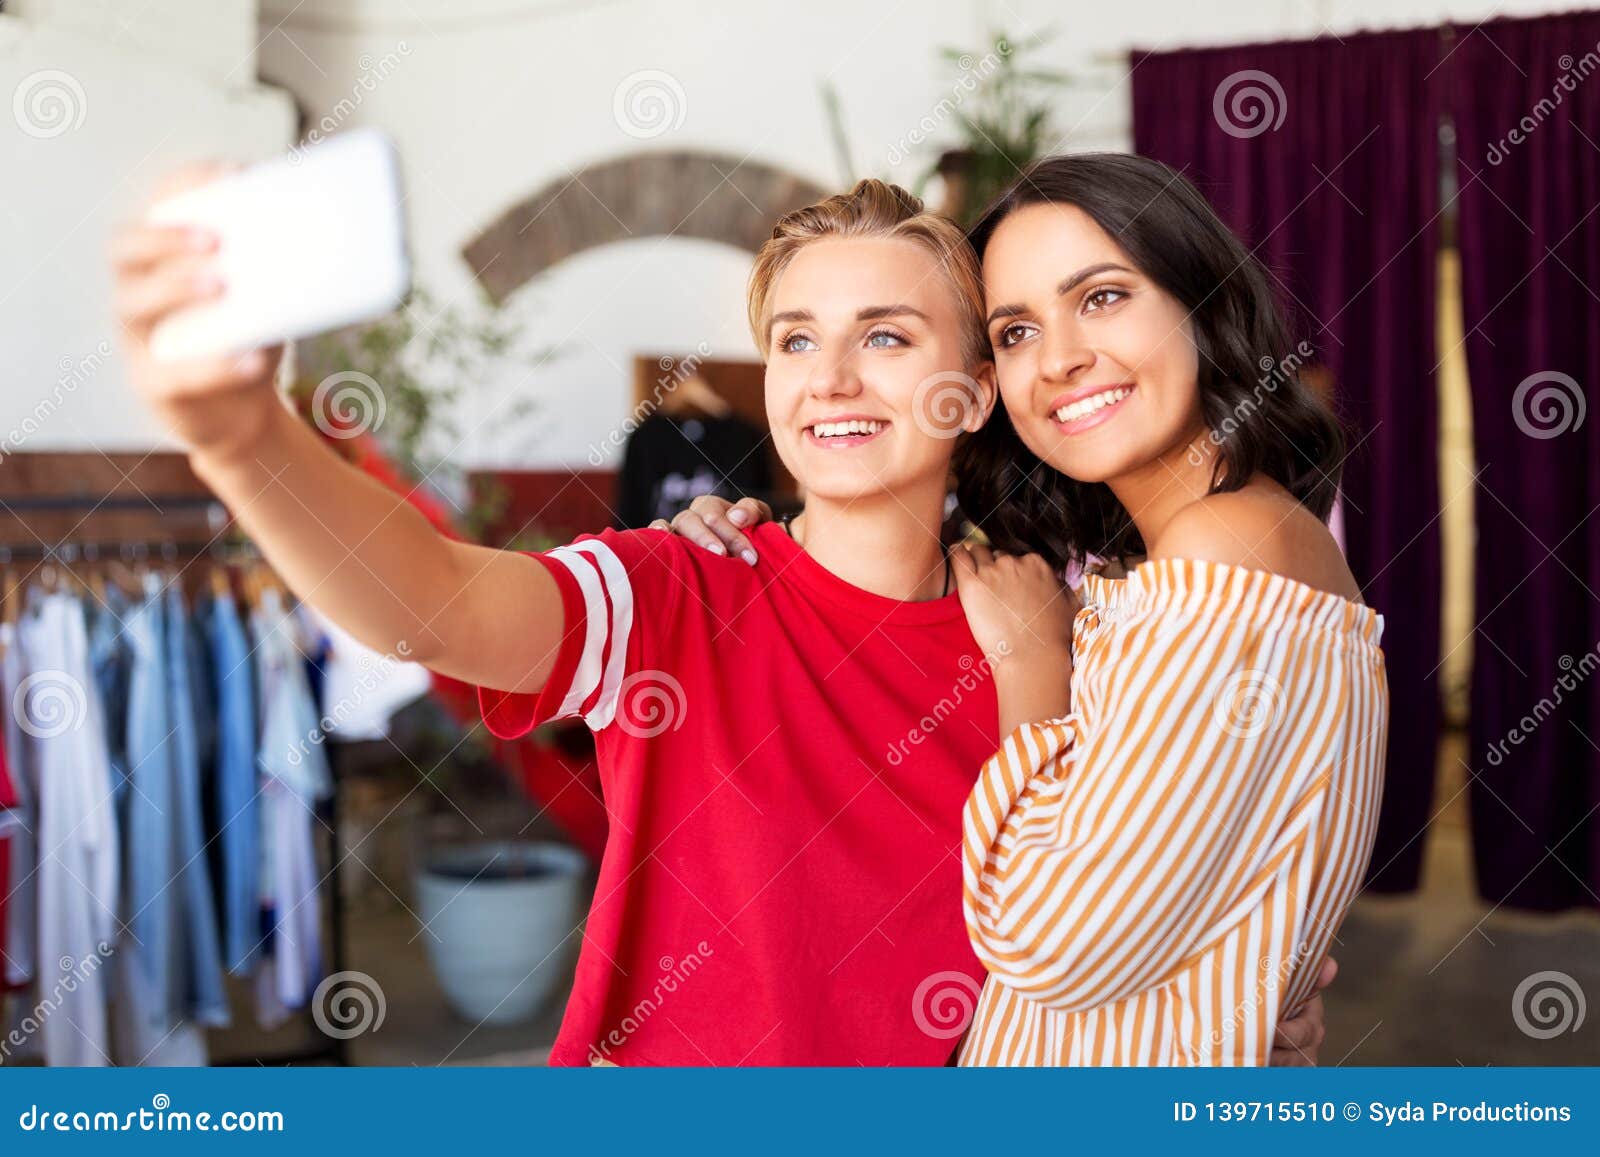 Female Friends Taking Selfie at Clothing Store Stock Photo - Image of ...